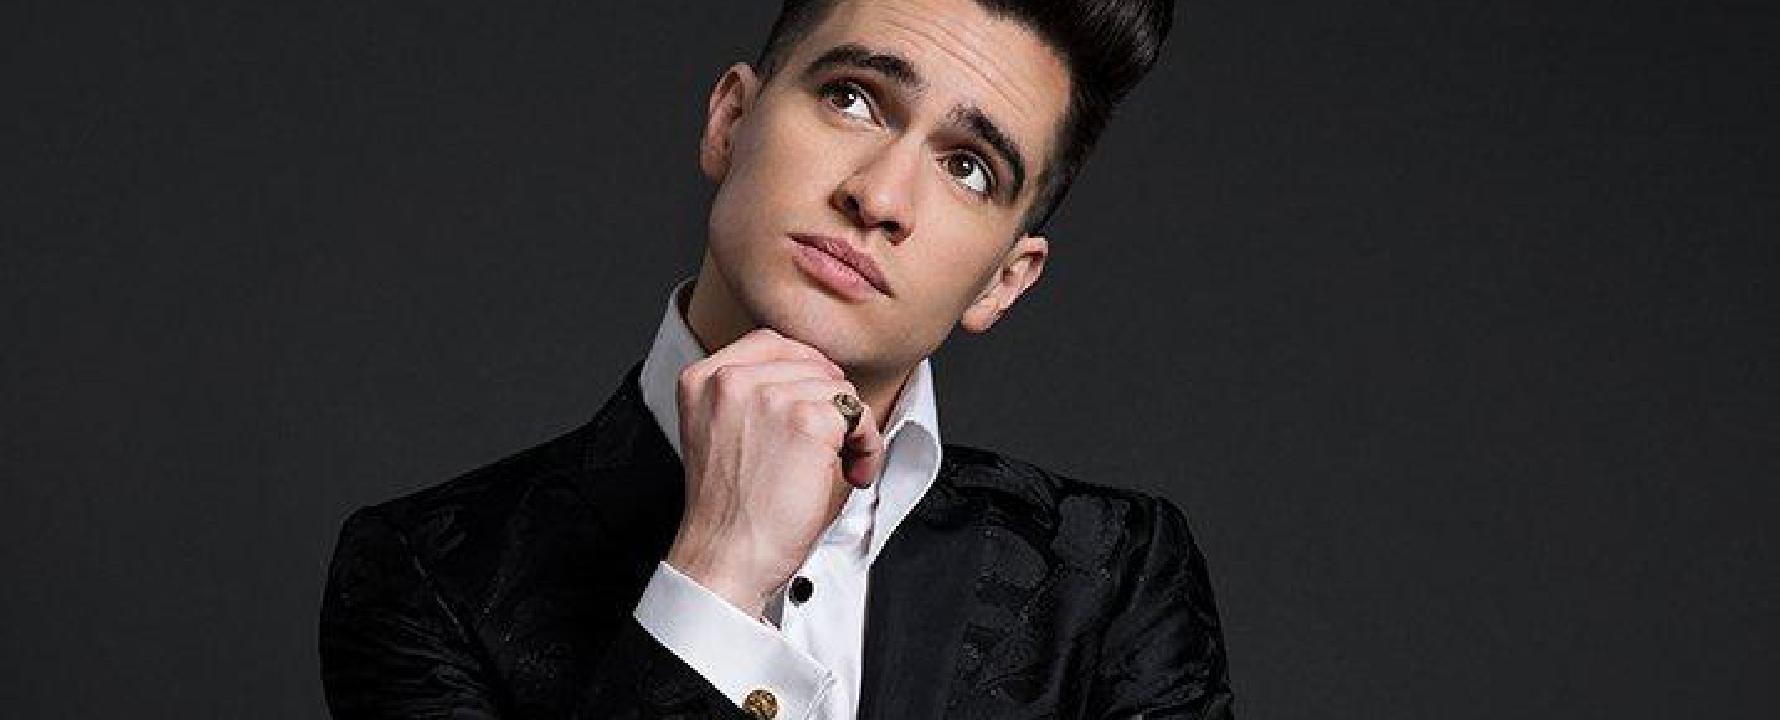 Promotional photograph of Panic! At the Disco.